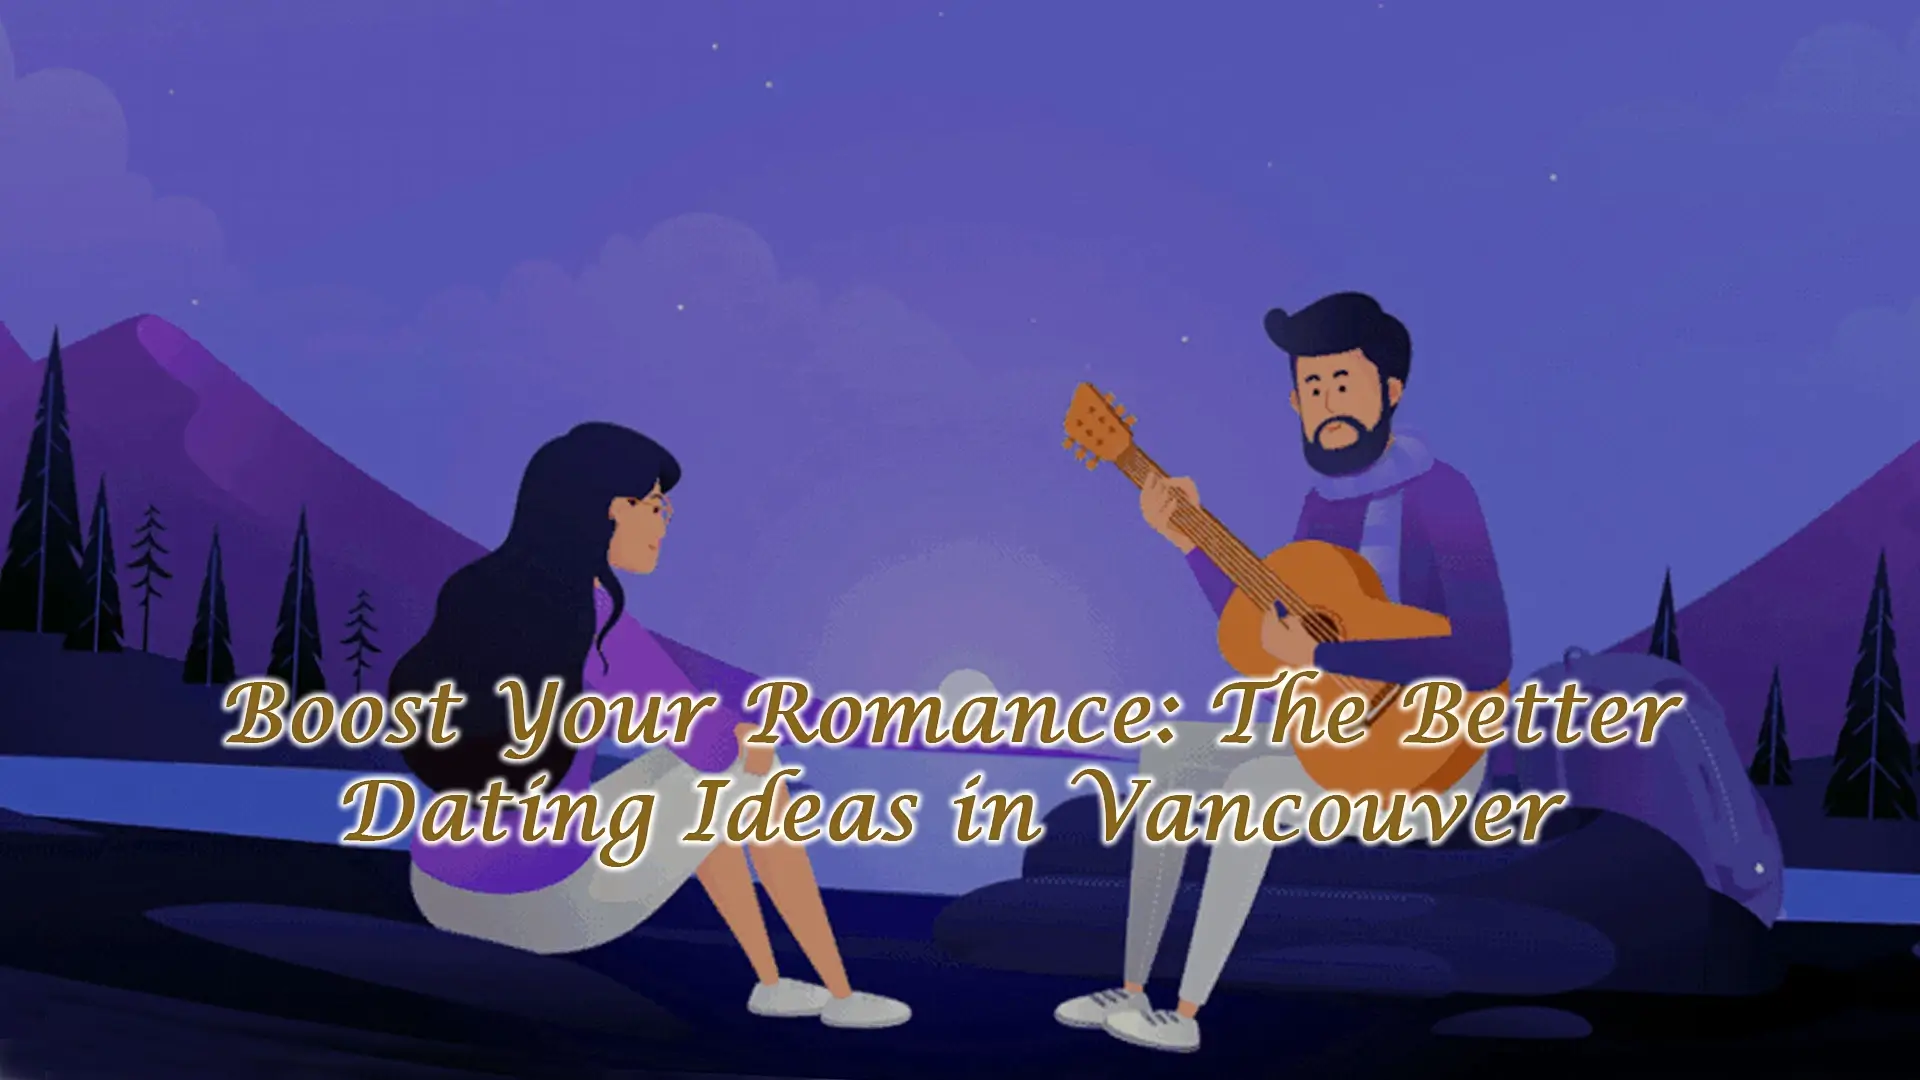 Boost Your Romance: The Better Dating Ideas in Vancouver